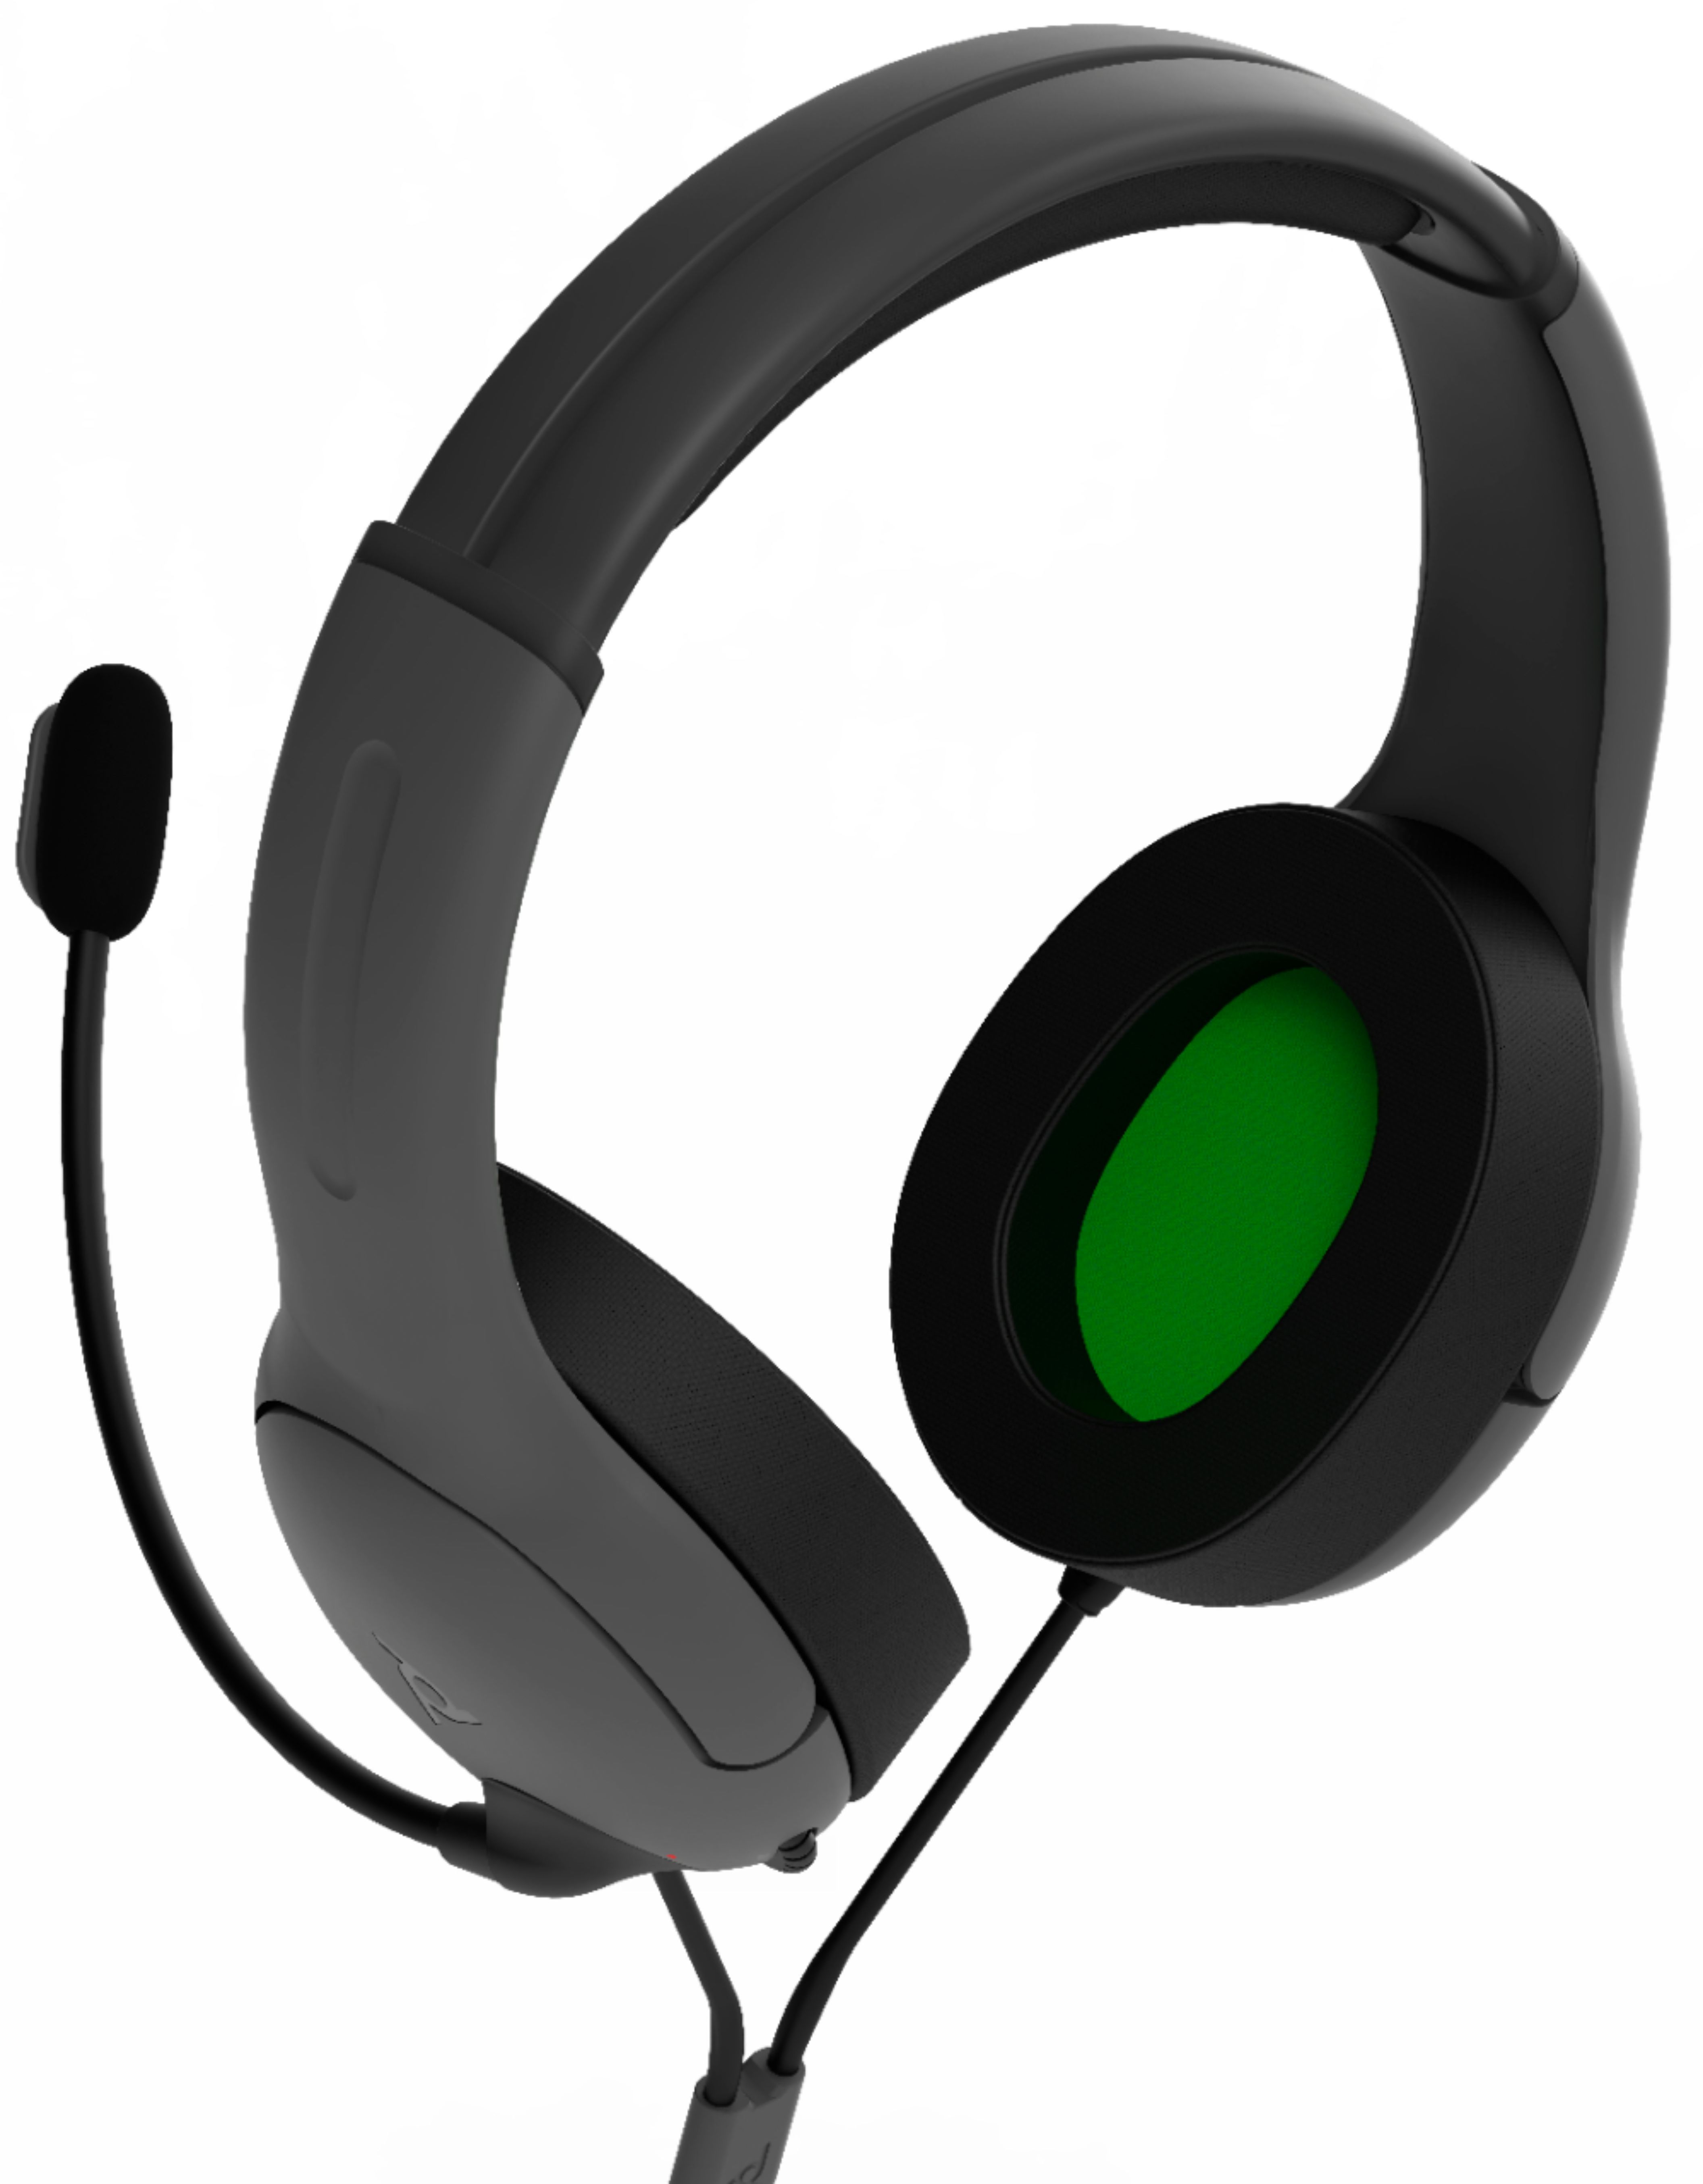 lvl 40 wired headset xbox one